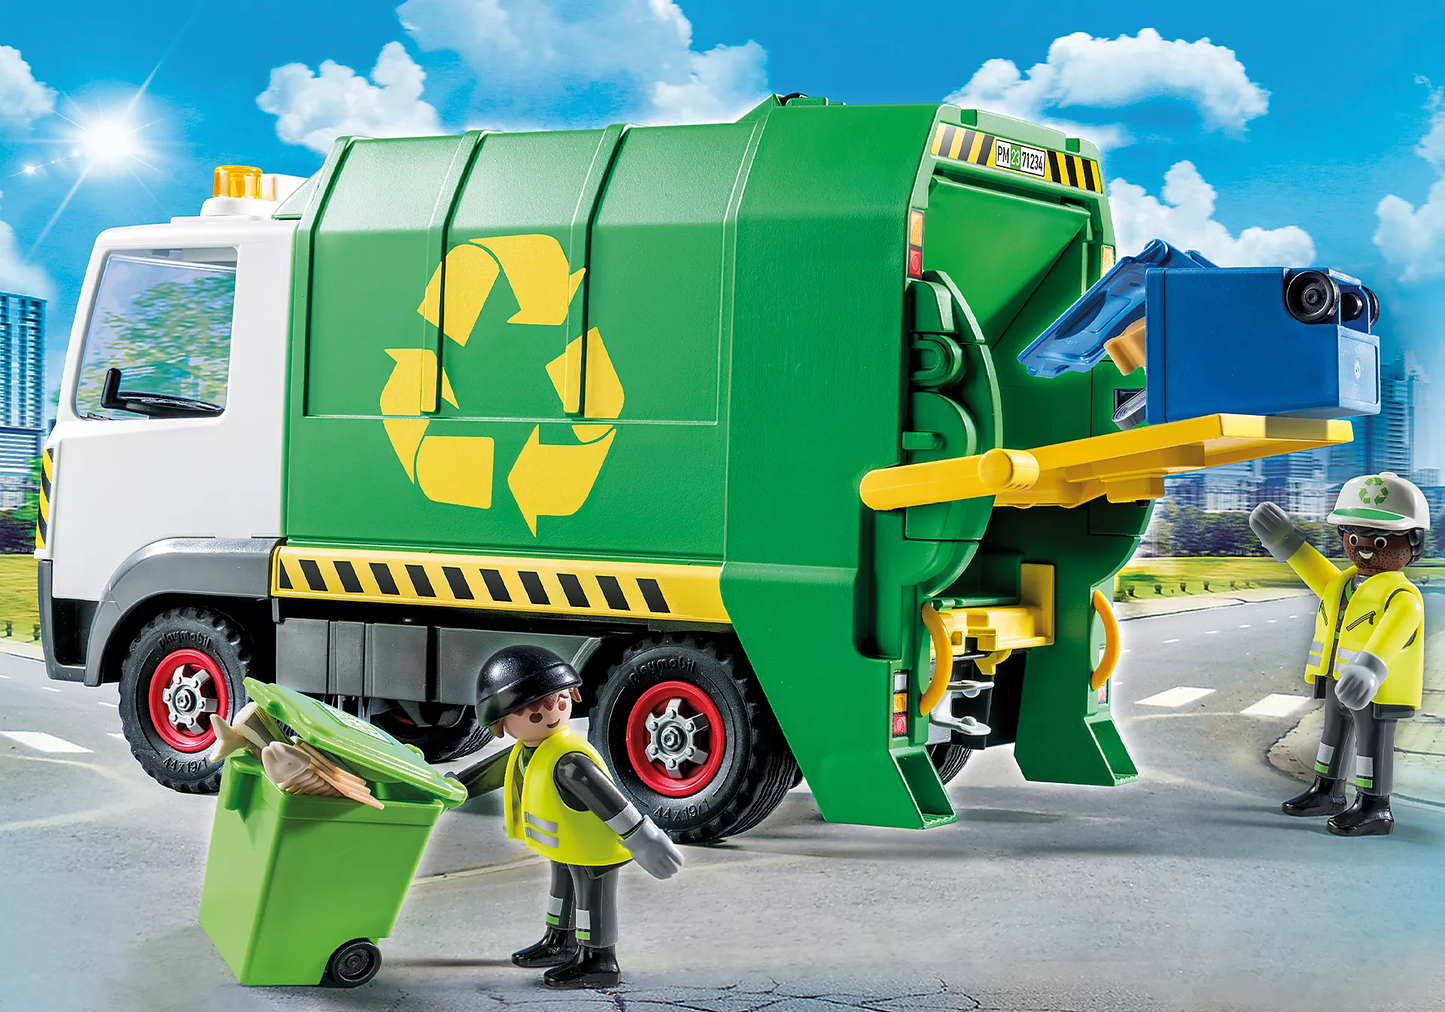 CAMION RECYCLAGE "CITY LIFE"